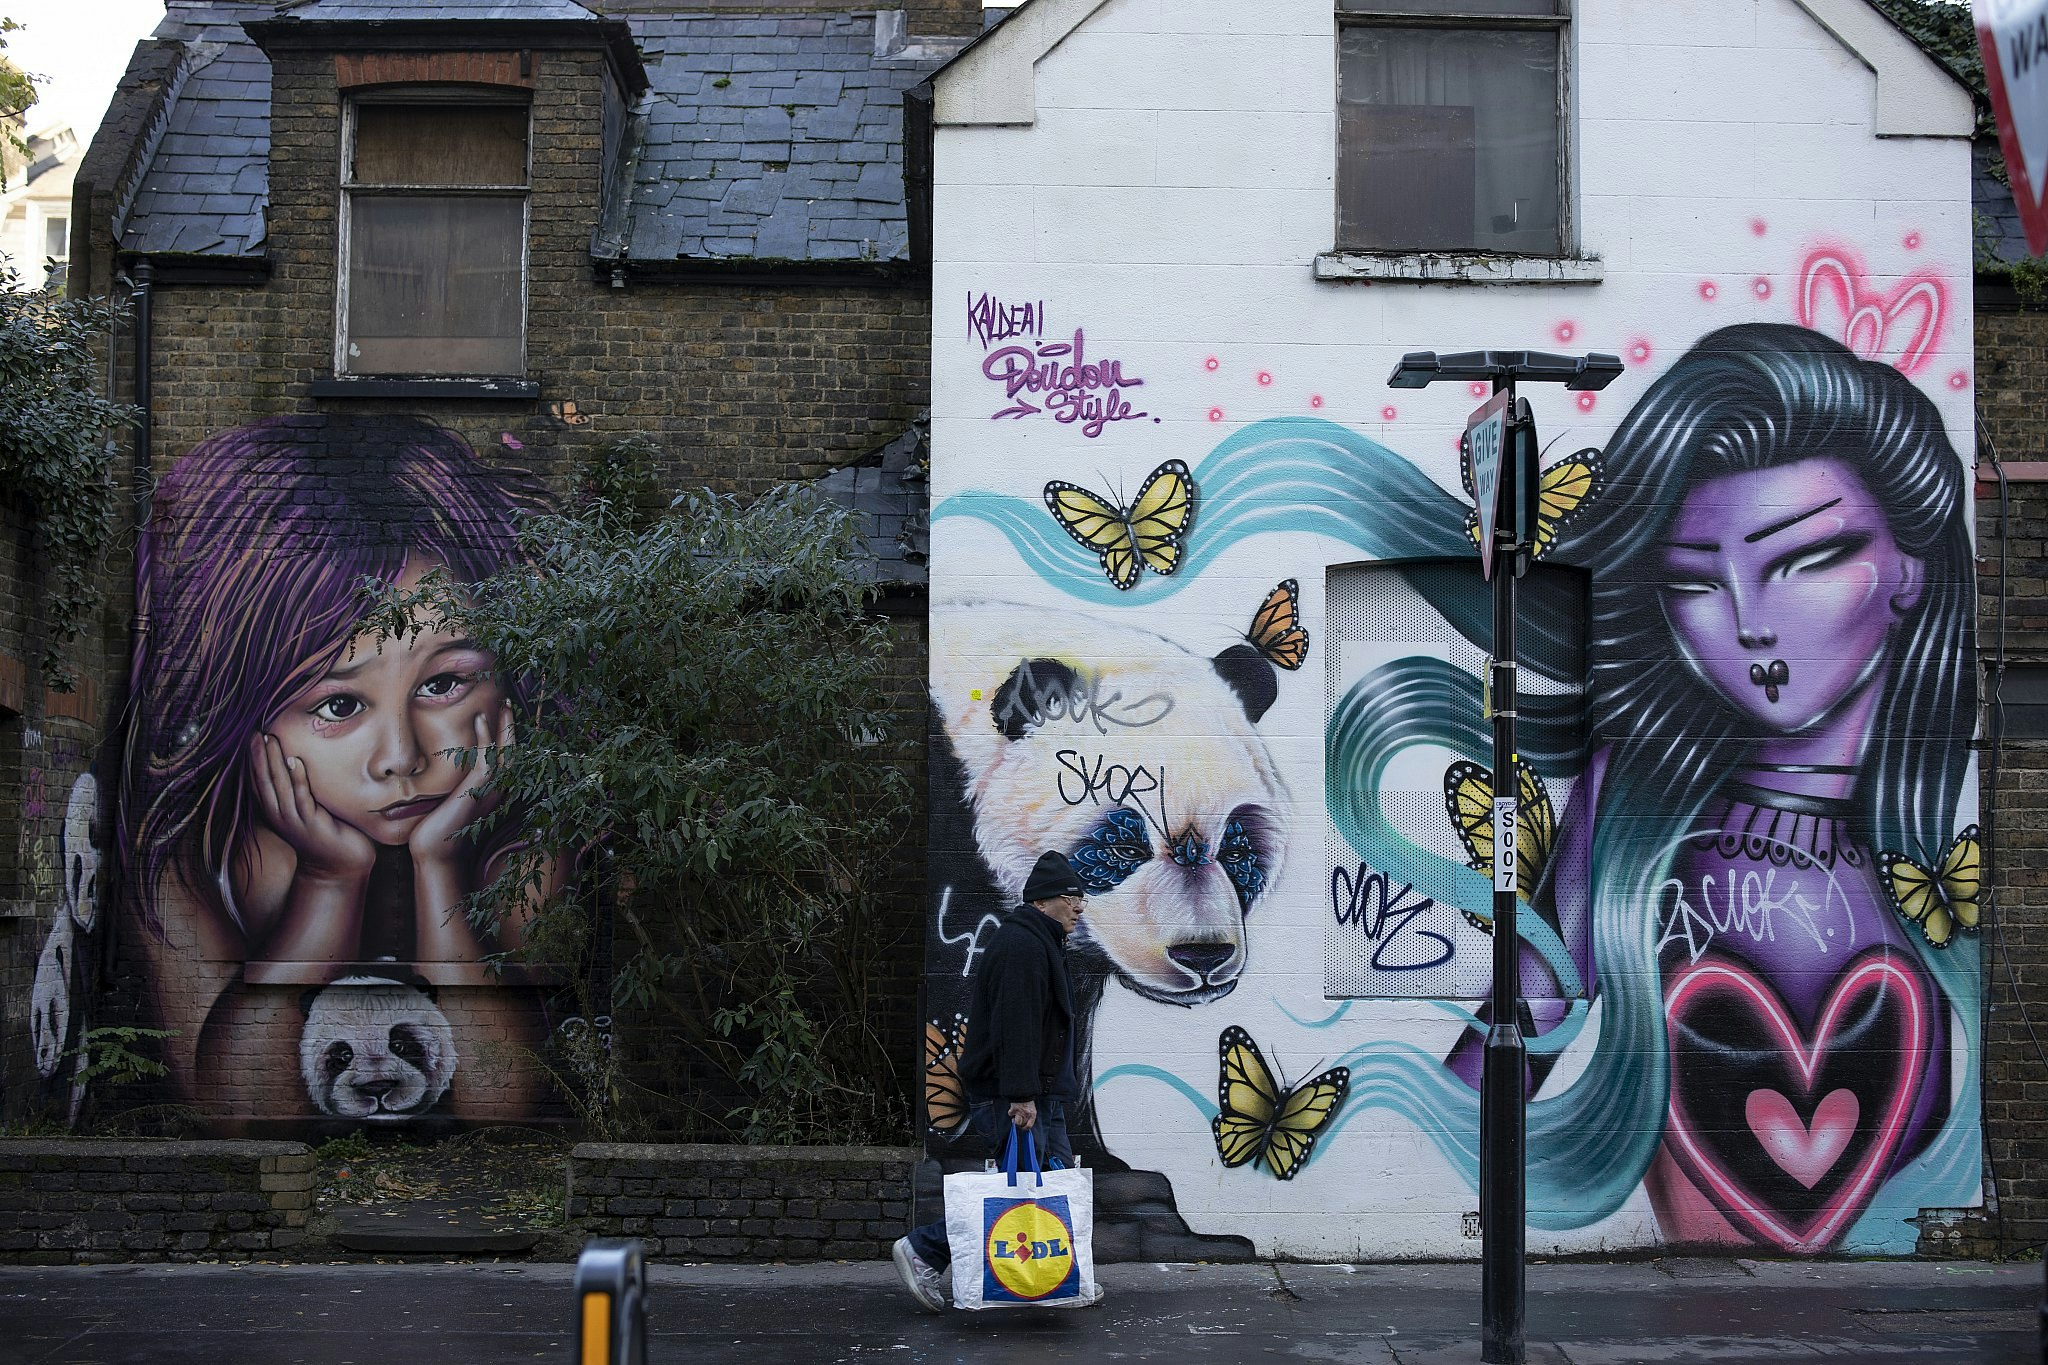 A man carrying a Lidl shopping bag walks past a dilapidated-looking house with its walls covered in street art, including pandas, yellow butterflies, and a woman with purple skin and flowing turquoise hair. 